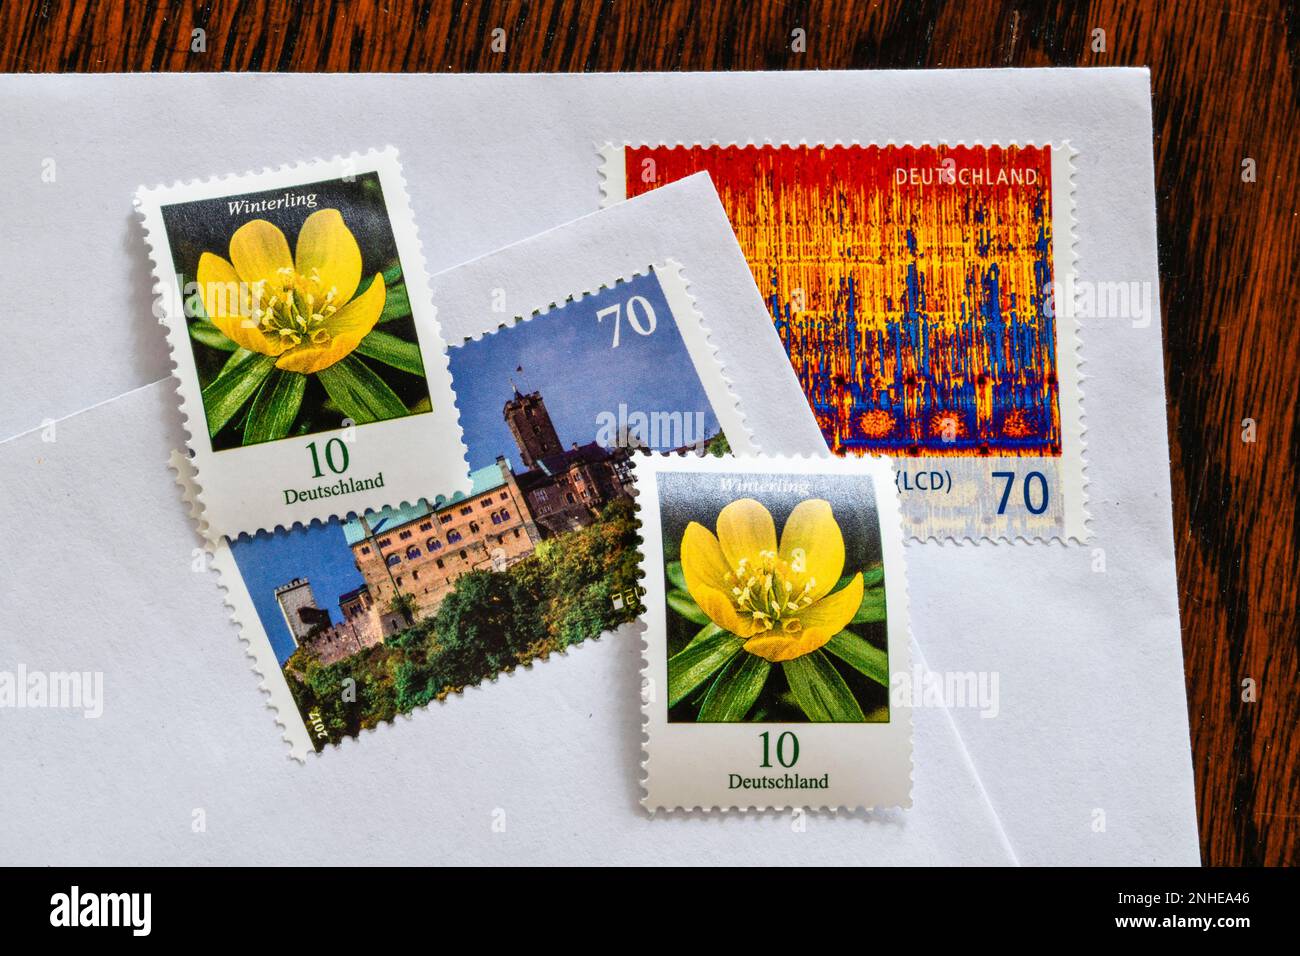 German stamps 70 cent and 10 cent Stock Photo